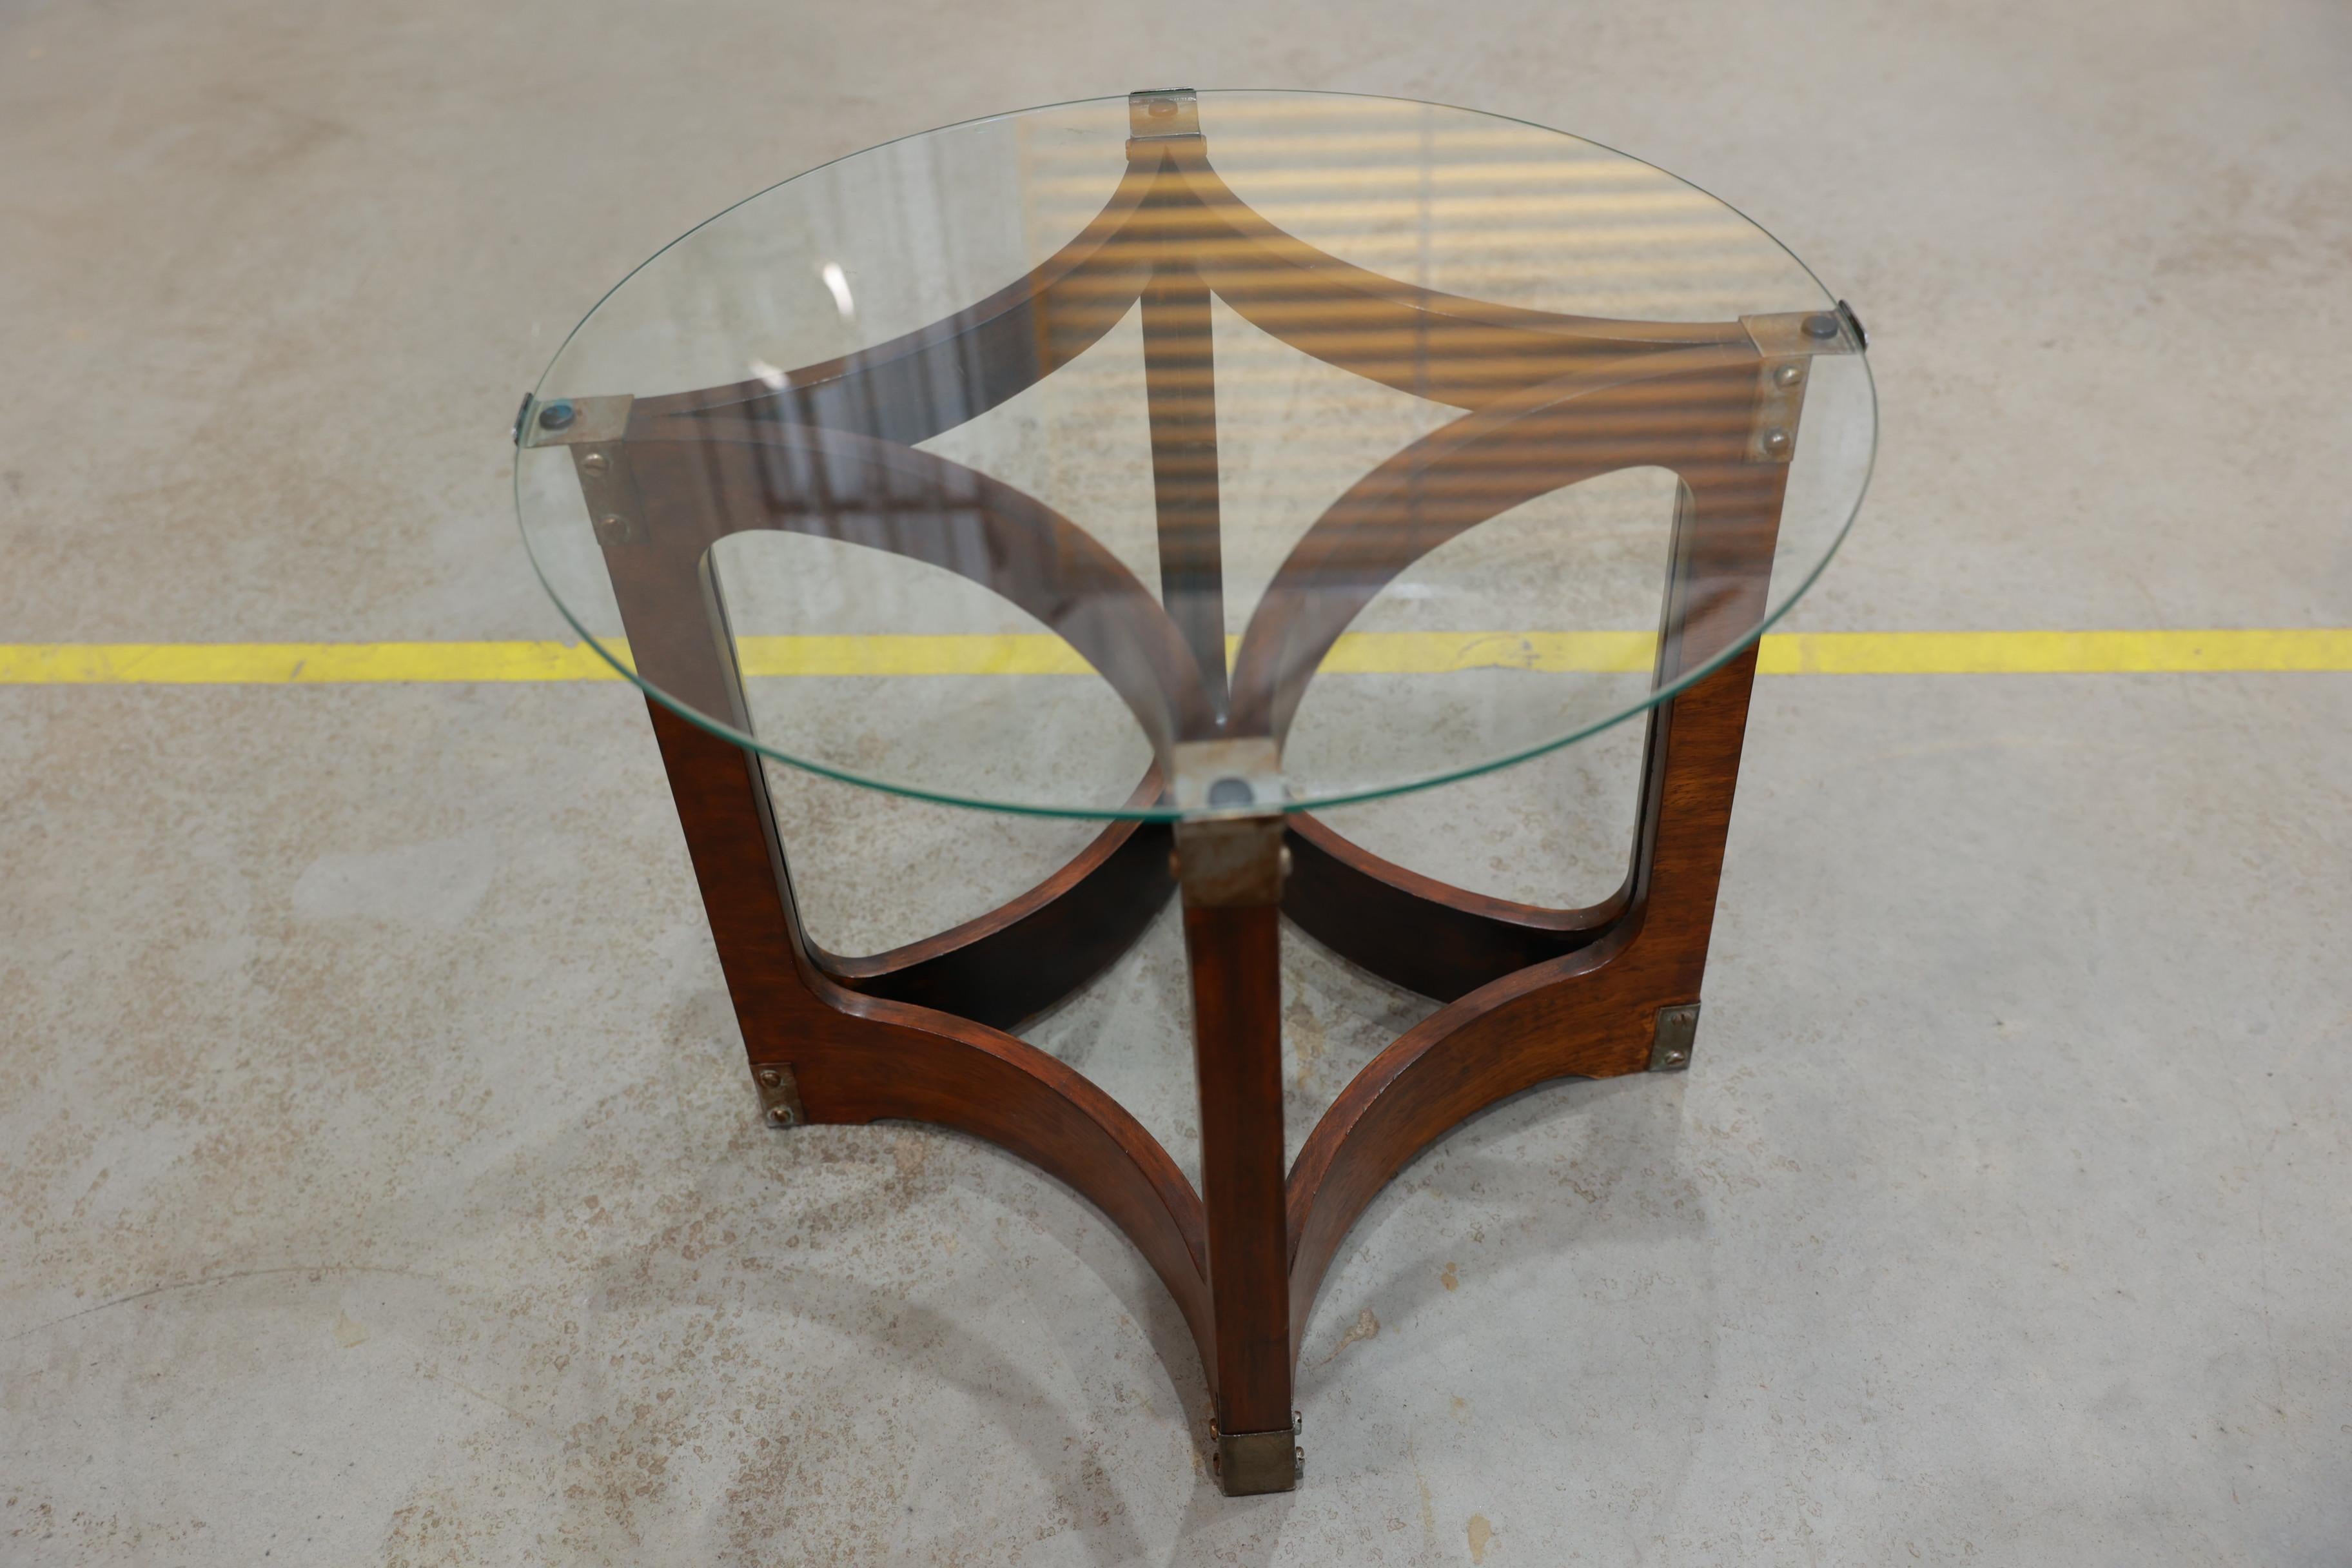 Mid-Century Modern Side Table in Bentwood & Glass by Novo Rumo, 1960s, Brazil For Sale 2